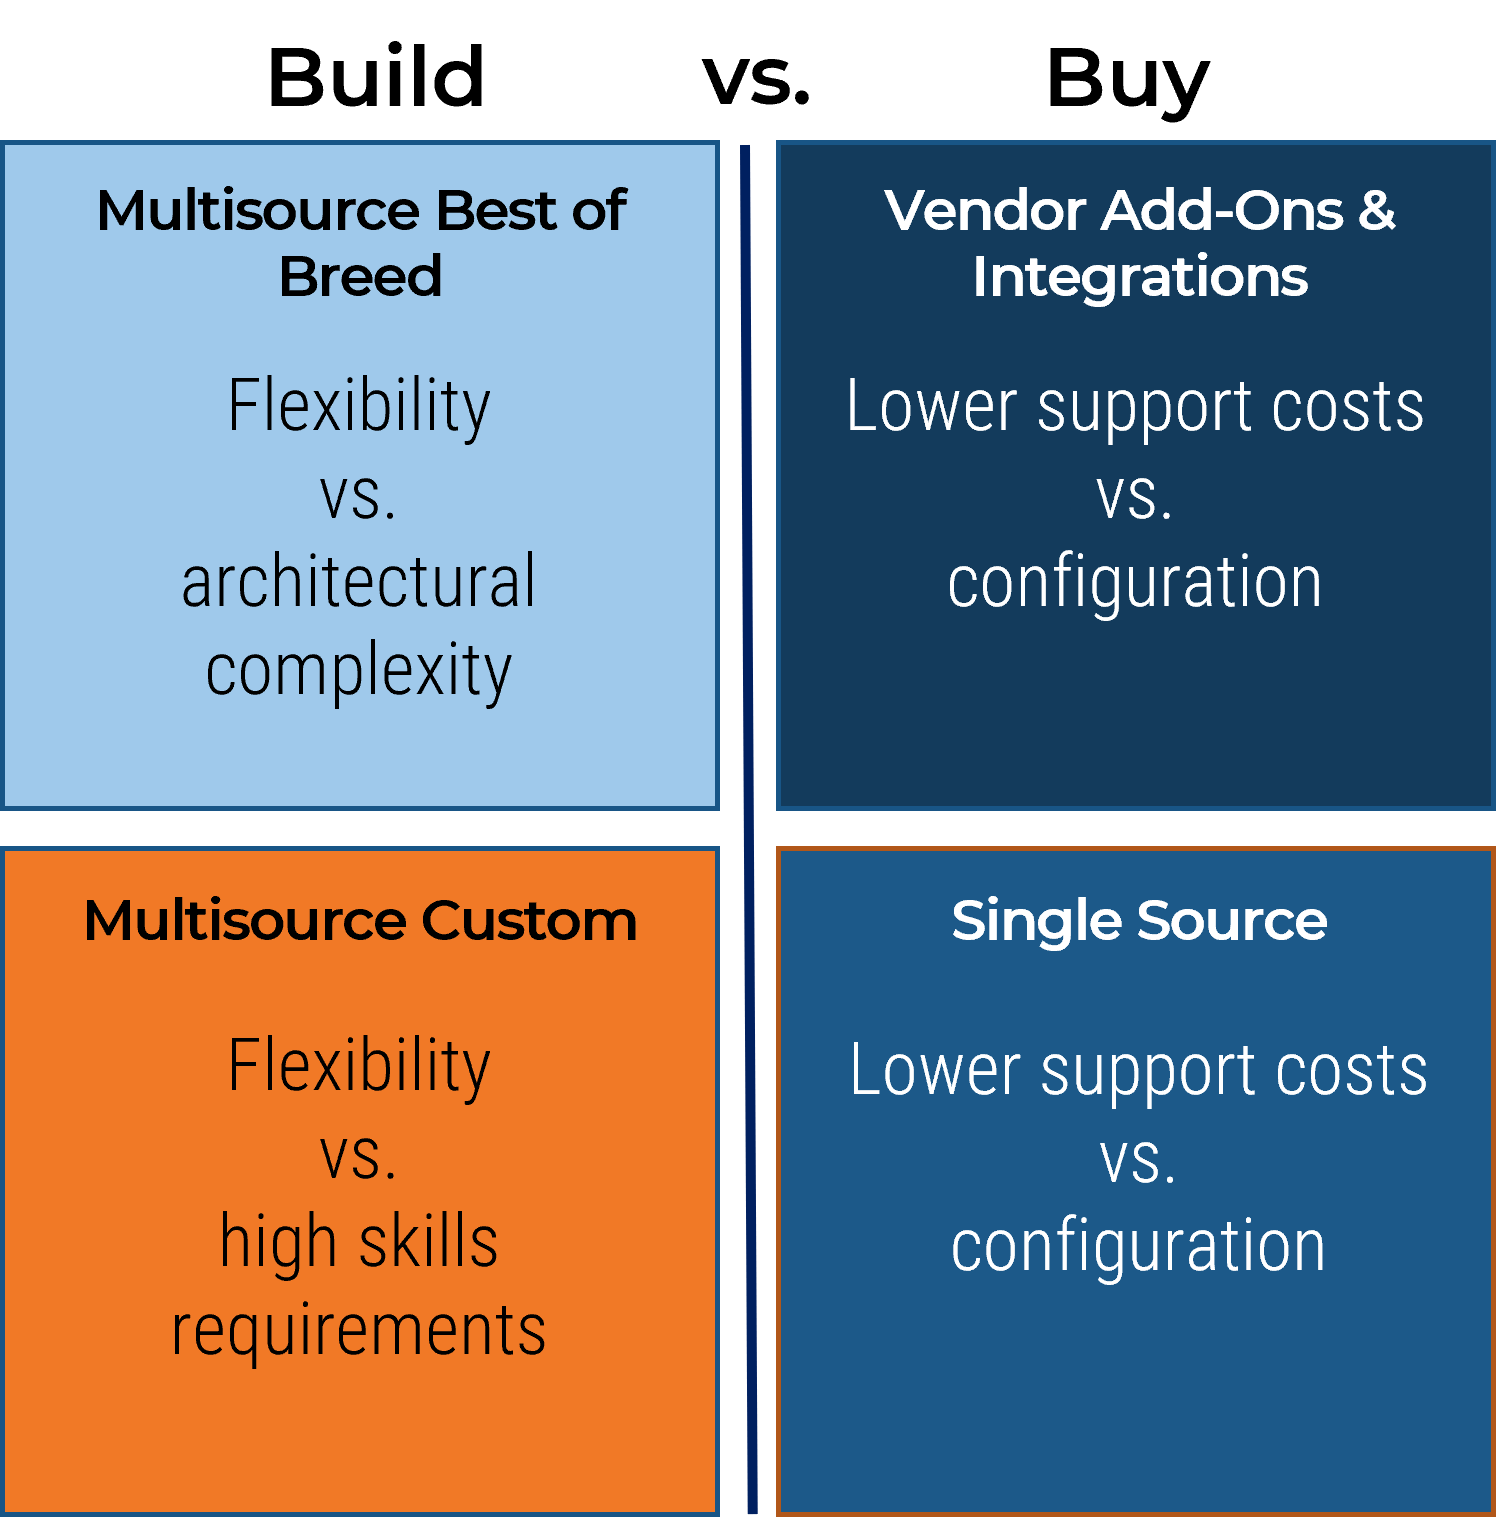 An image showing the pros and cons of building vs buying